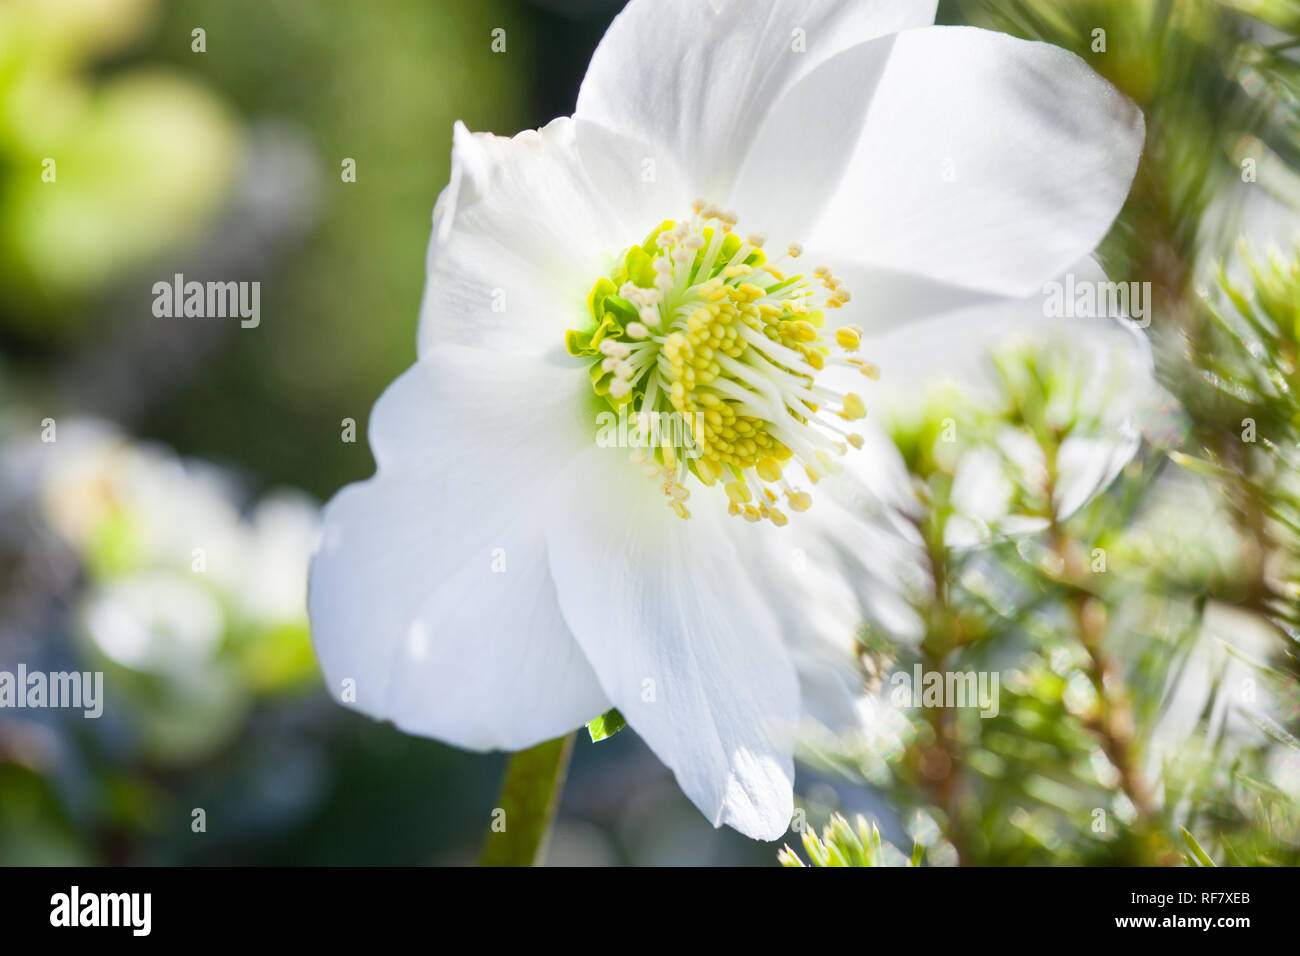 Close-up photo of beautiful Christmas rose (Helleborus niger) white flower in winter garden during sunny day Stock Photo